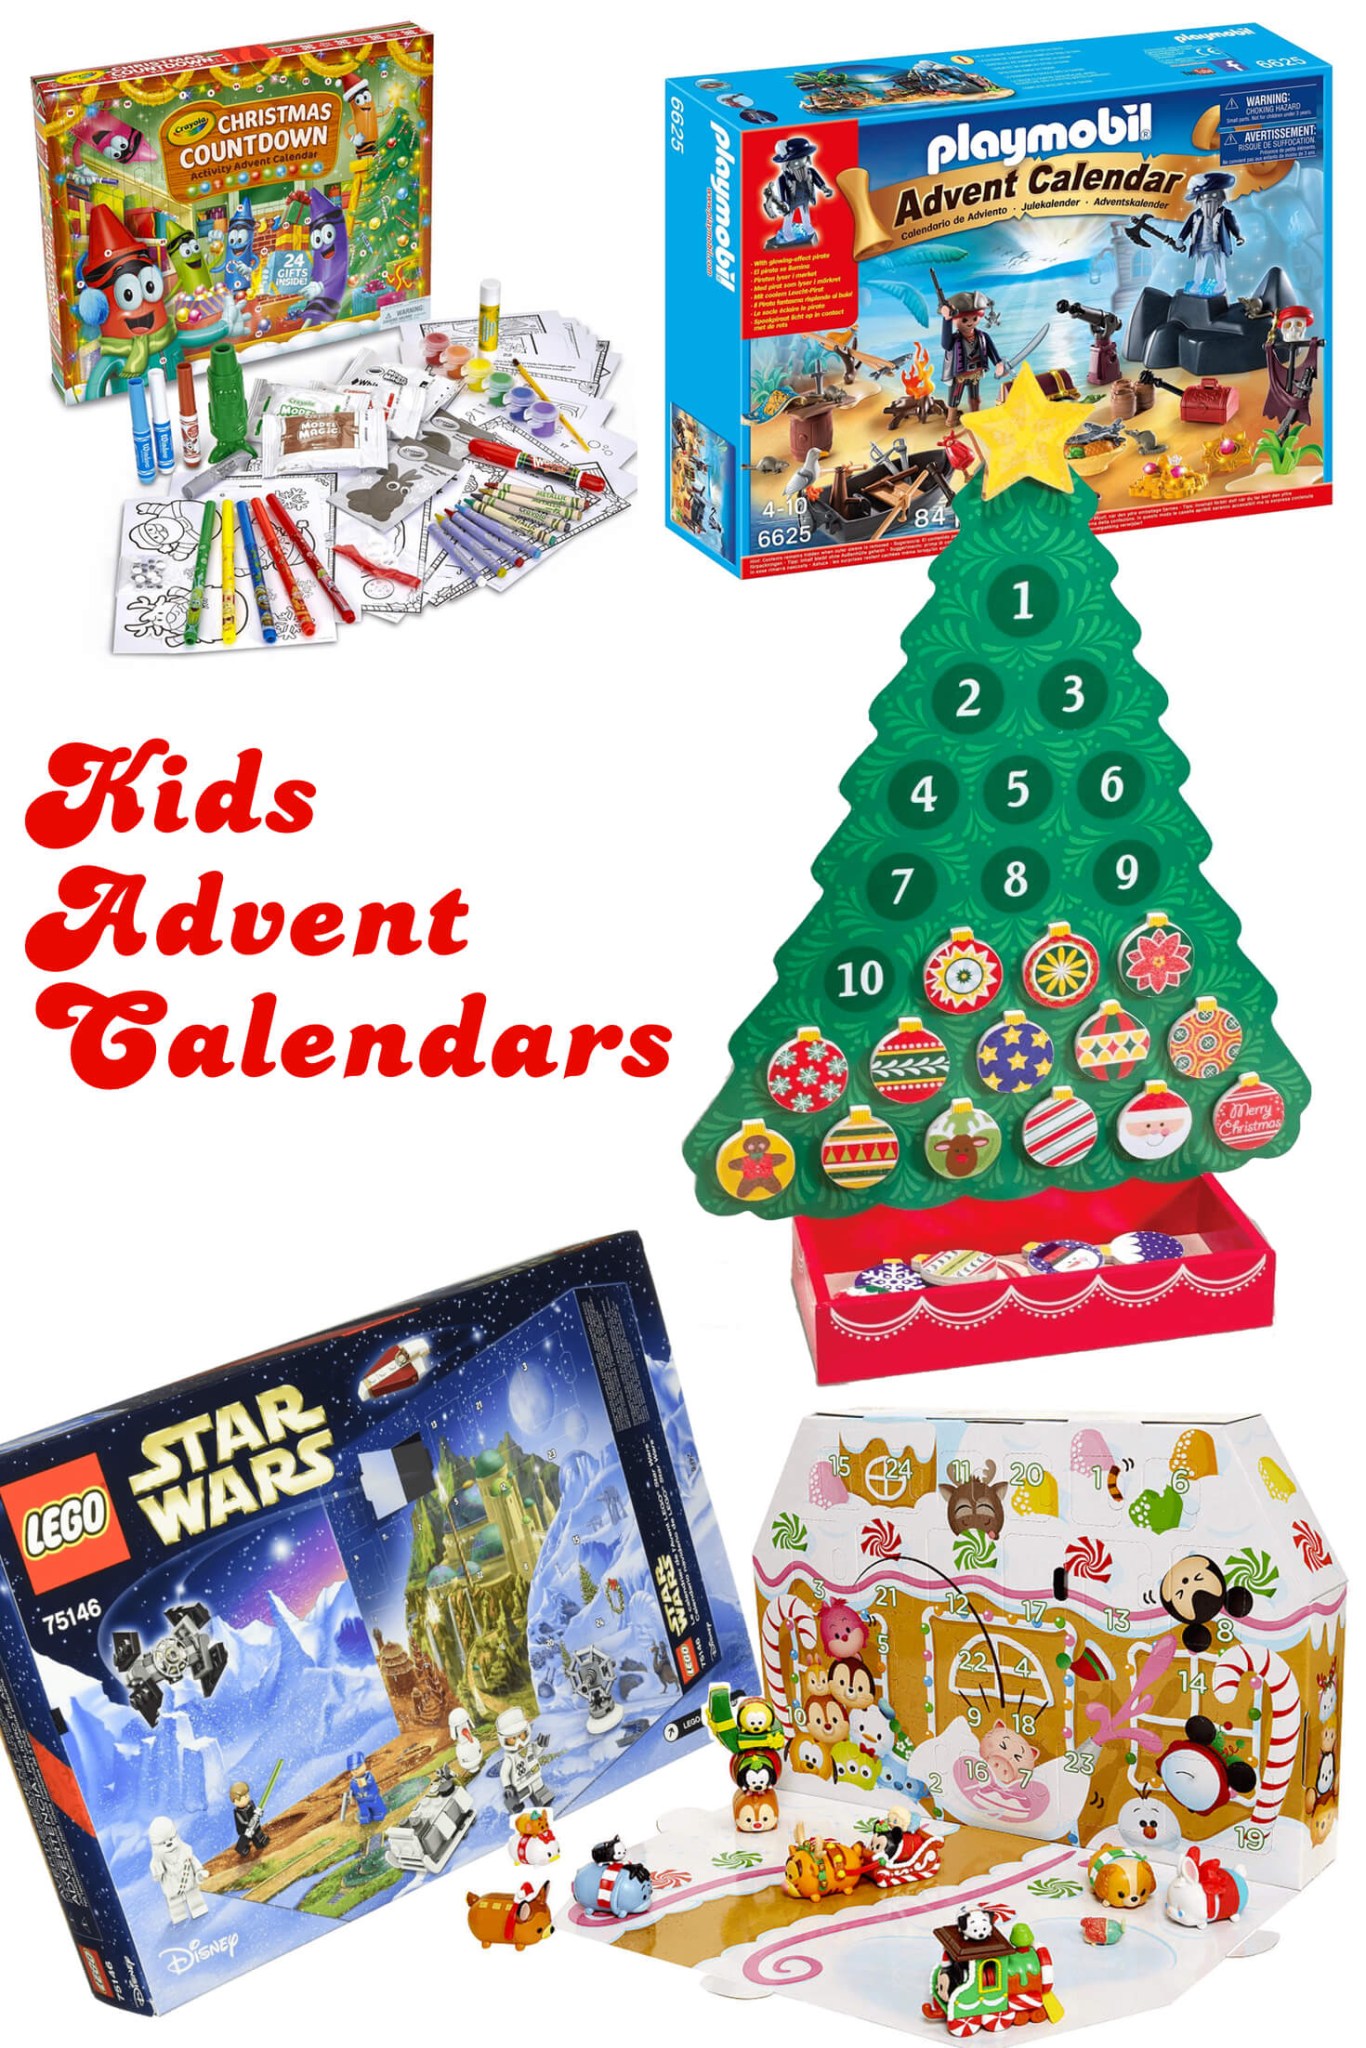 Fisher Price Little People Advent Calendar Reviews: Get All The Details